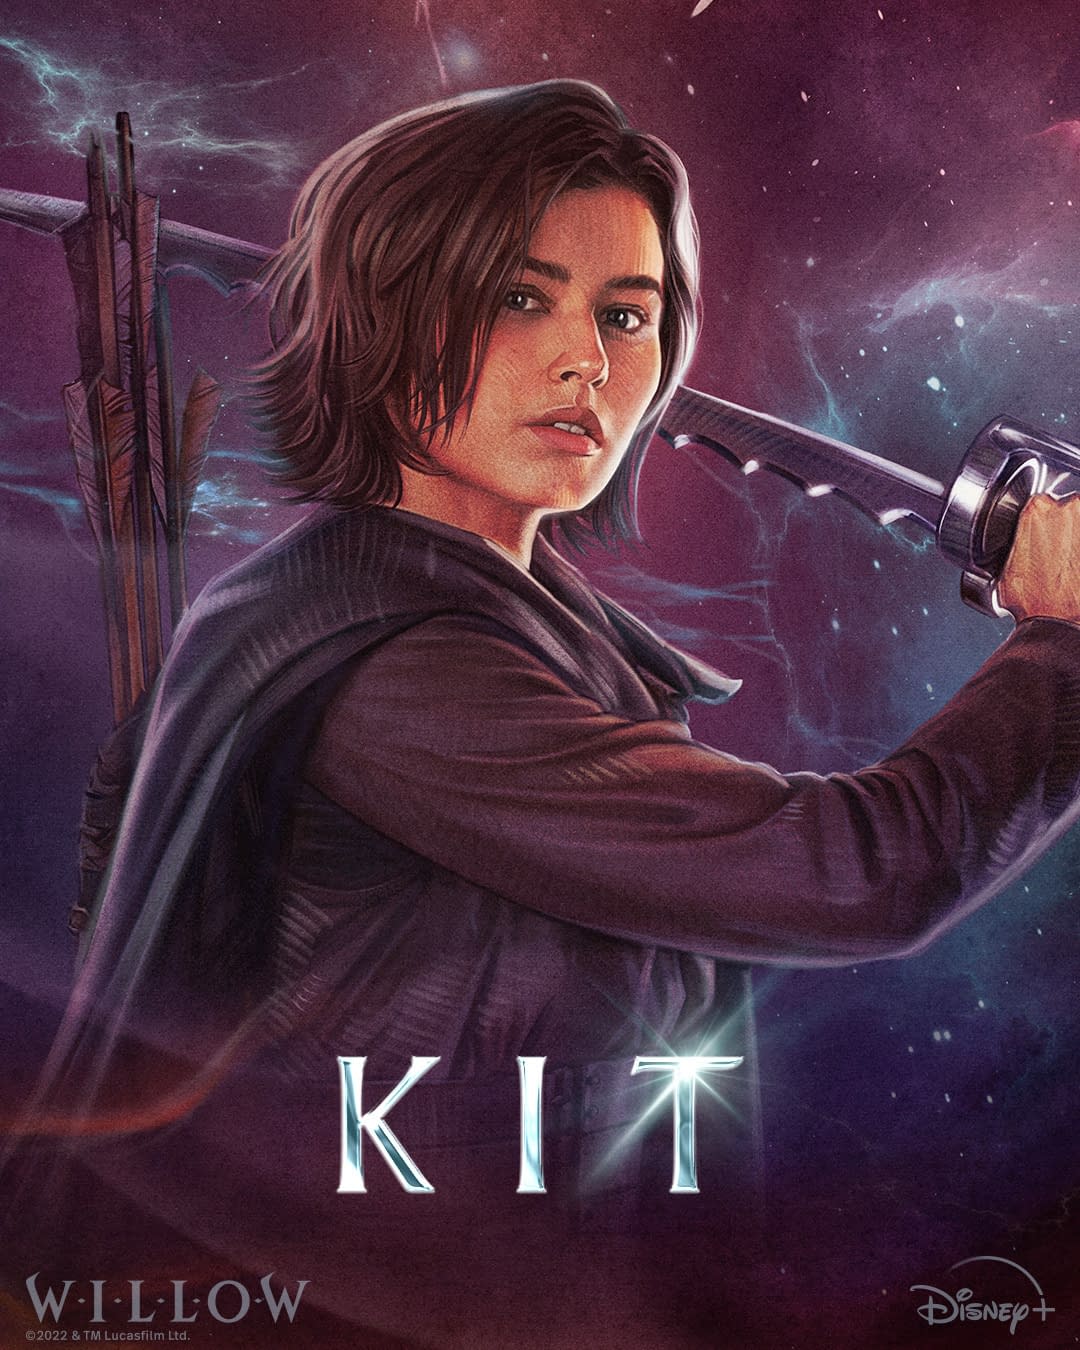 Willow Releases Magical New Character Profile Key Art Posters